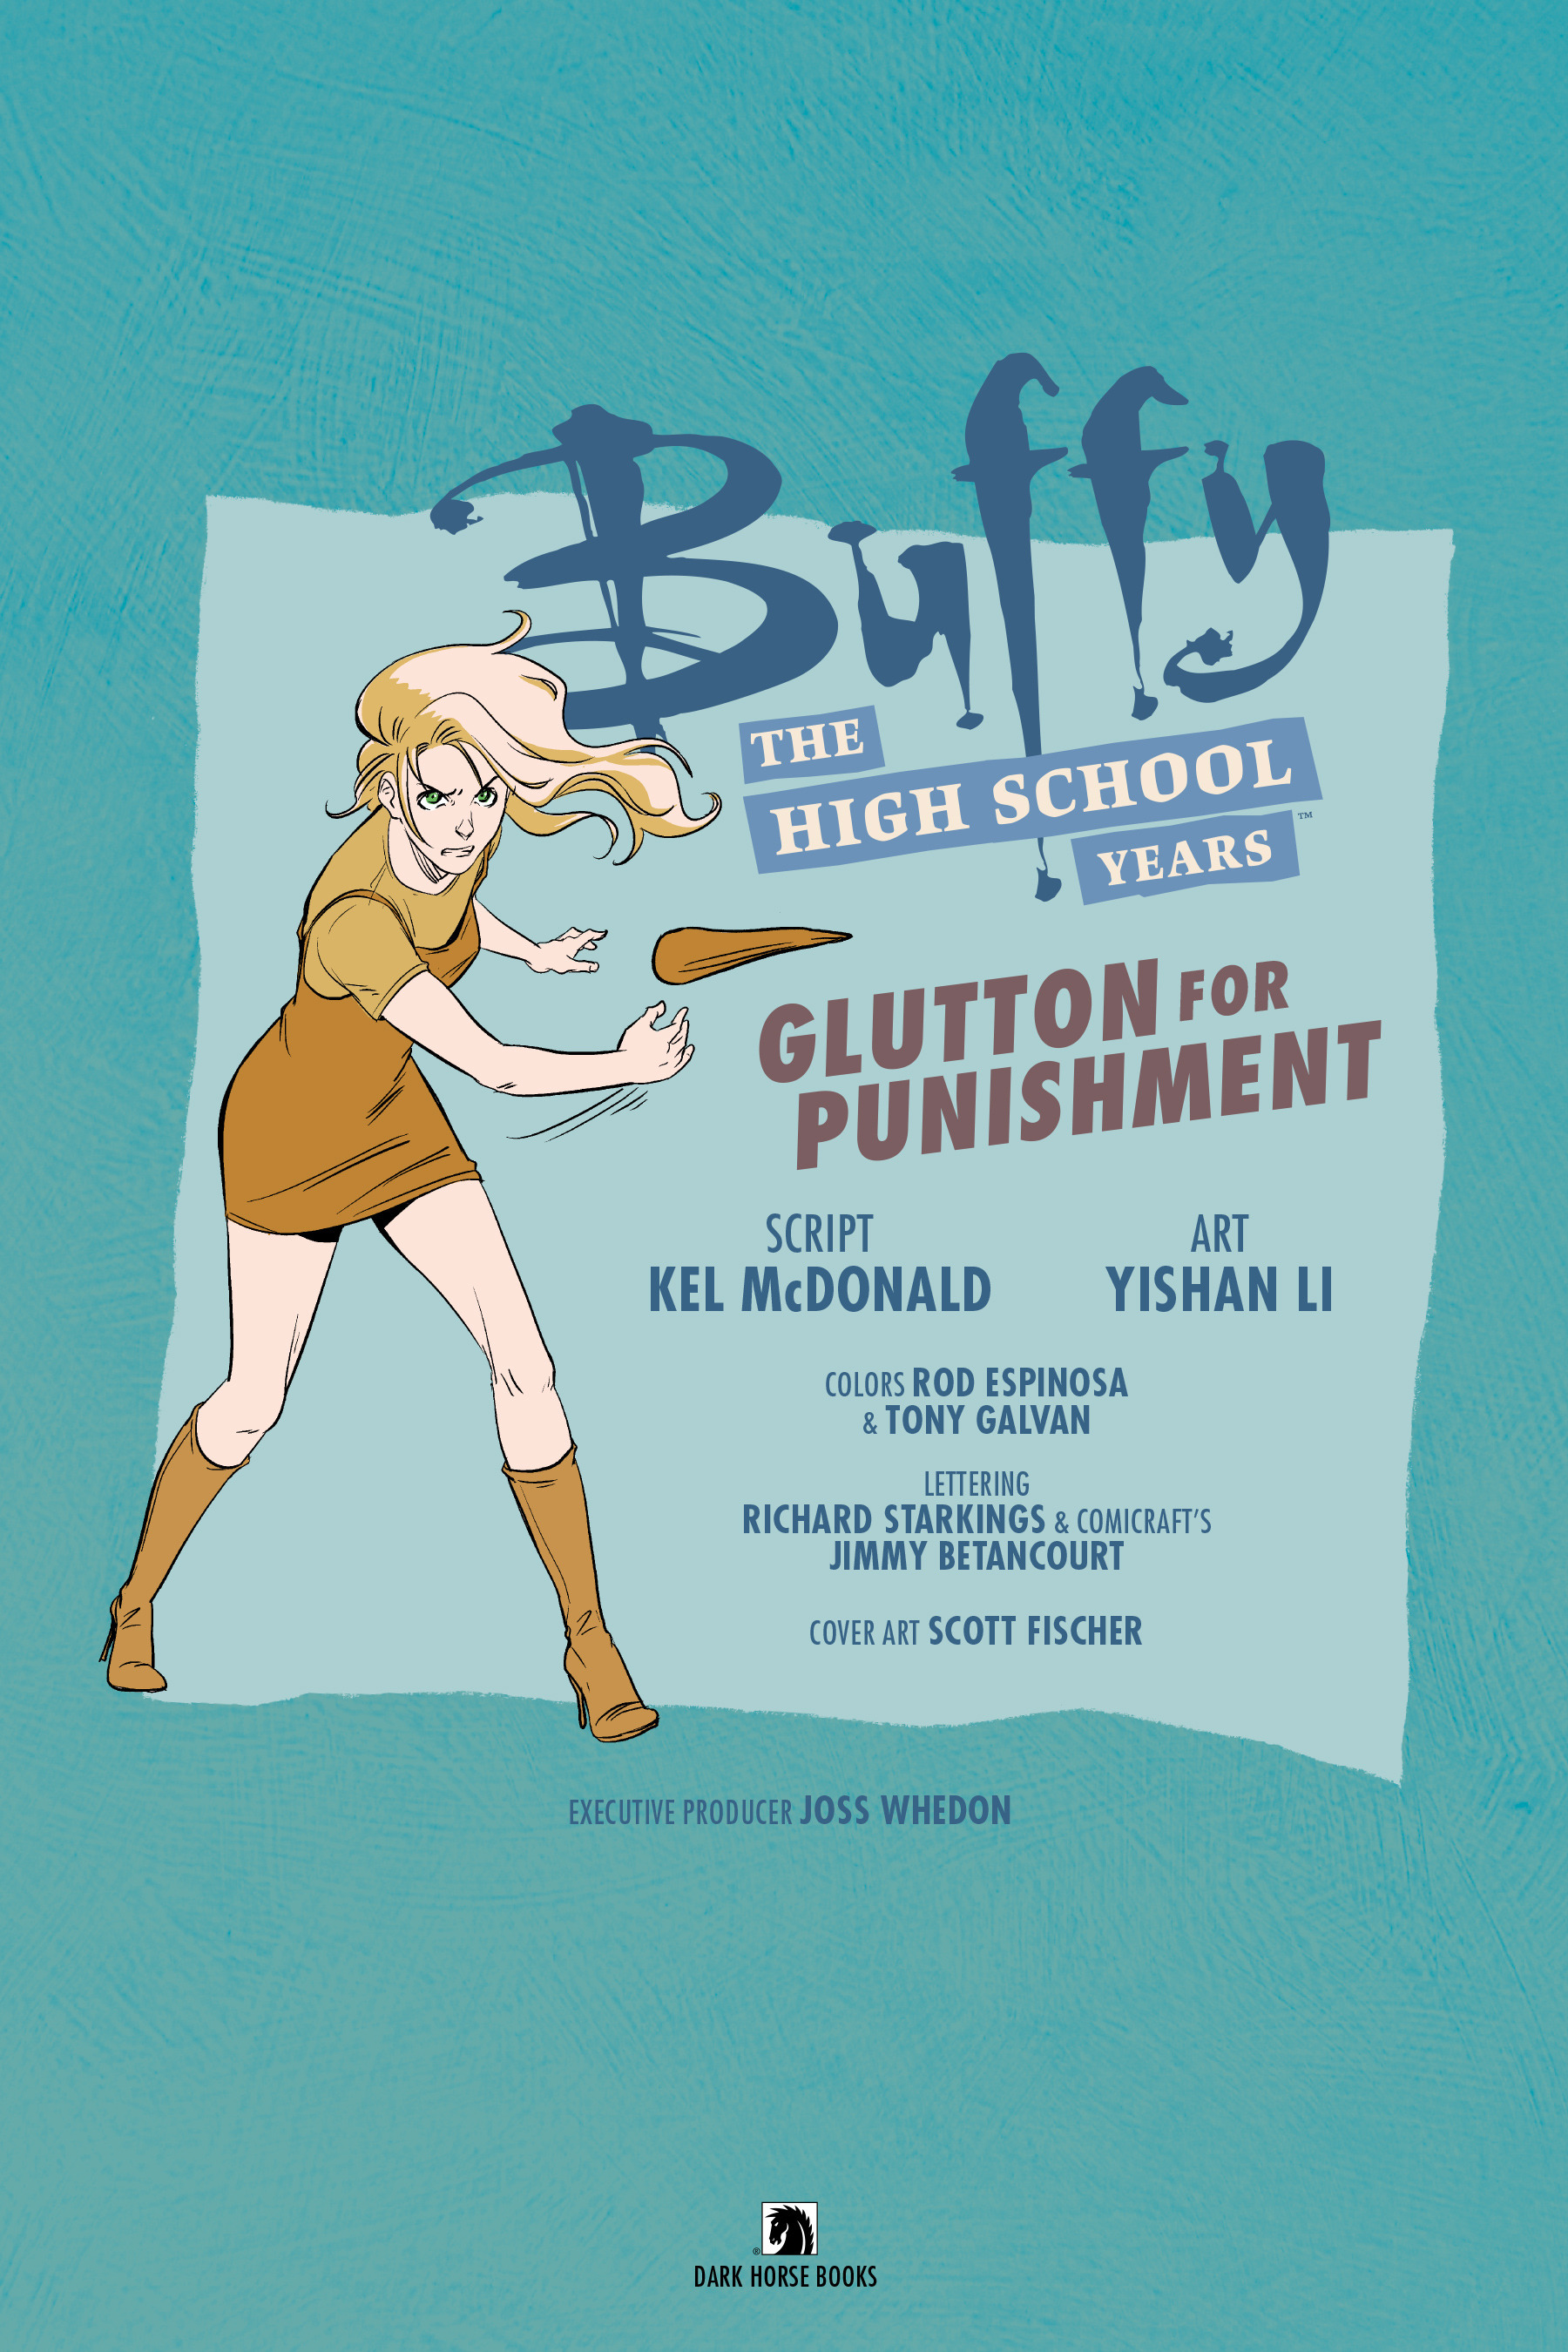 Buffy: The High School Years - Glutton For Punishment Full #1 - English 5